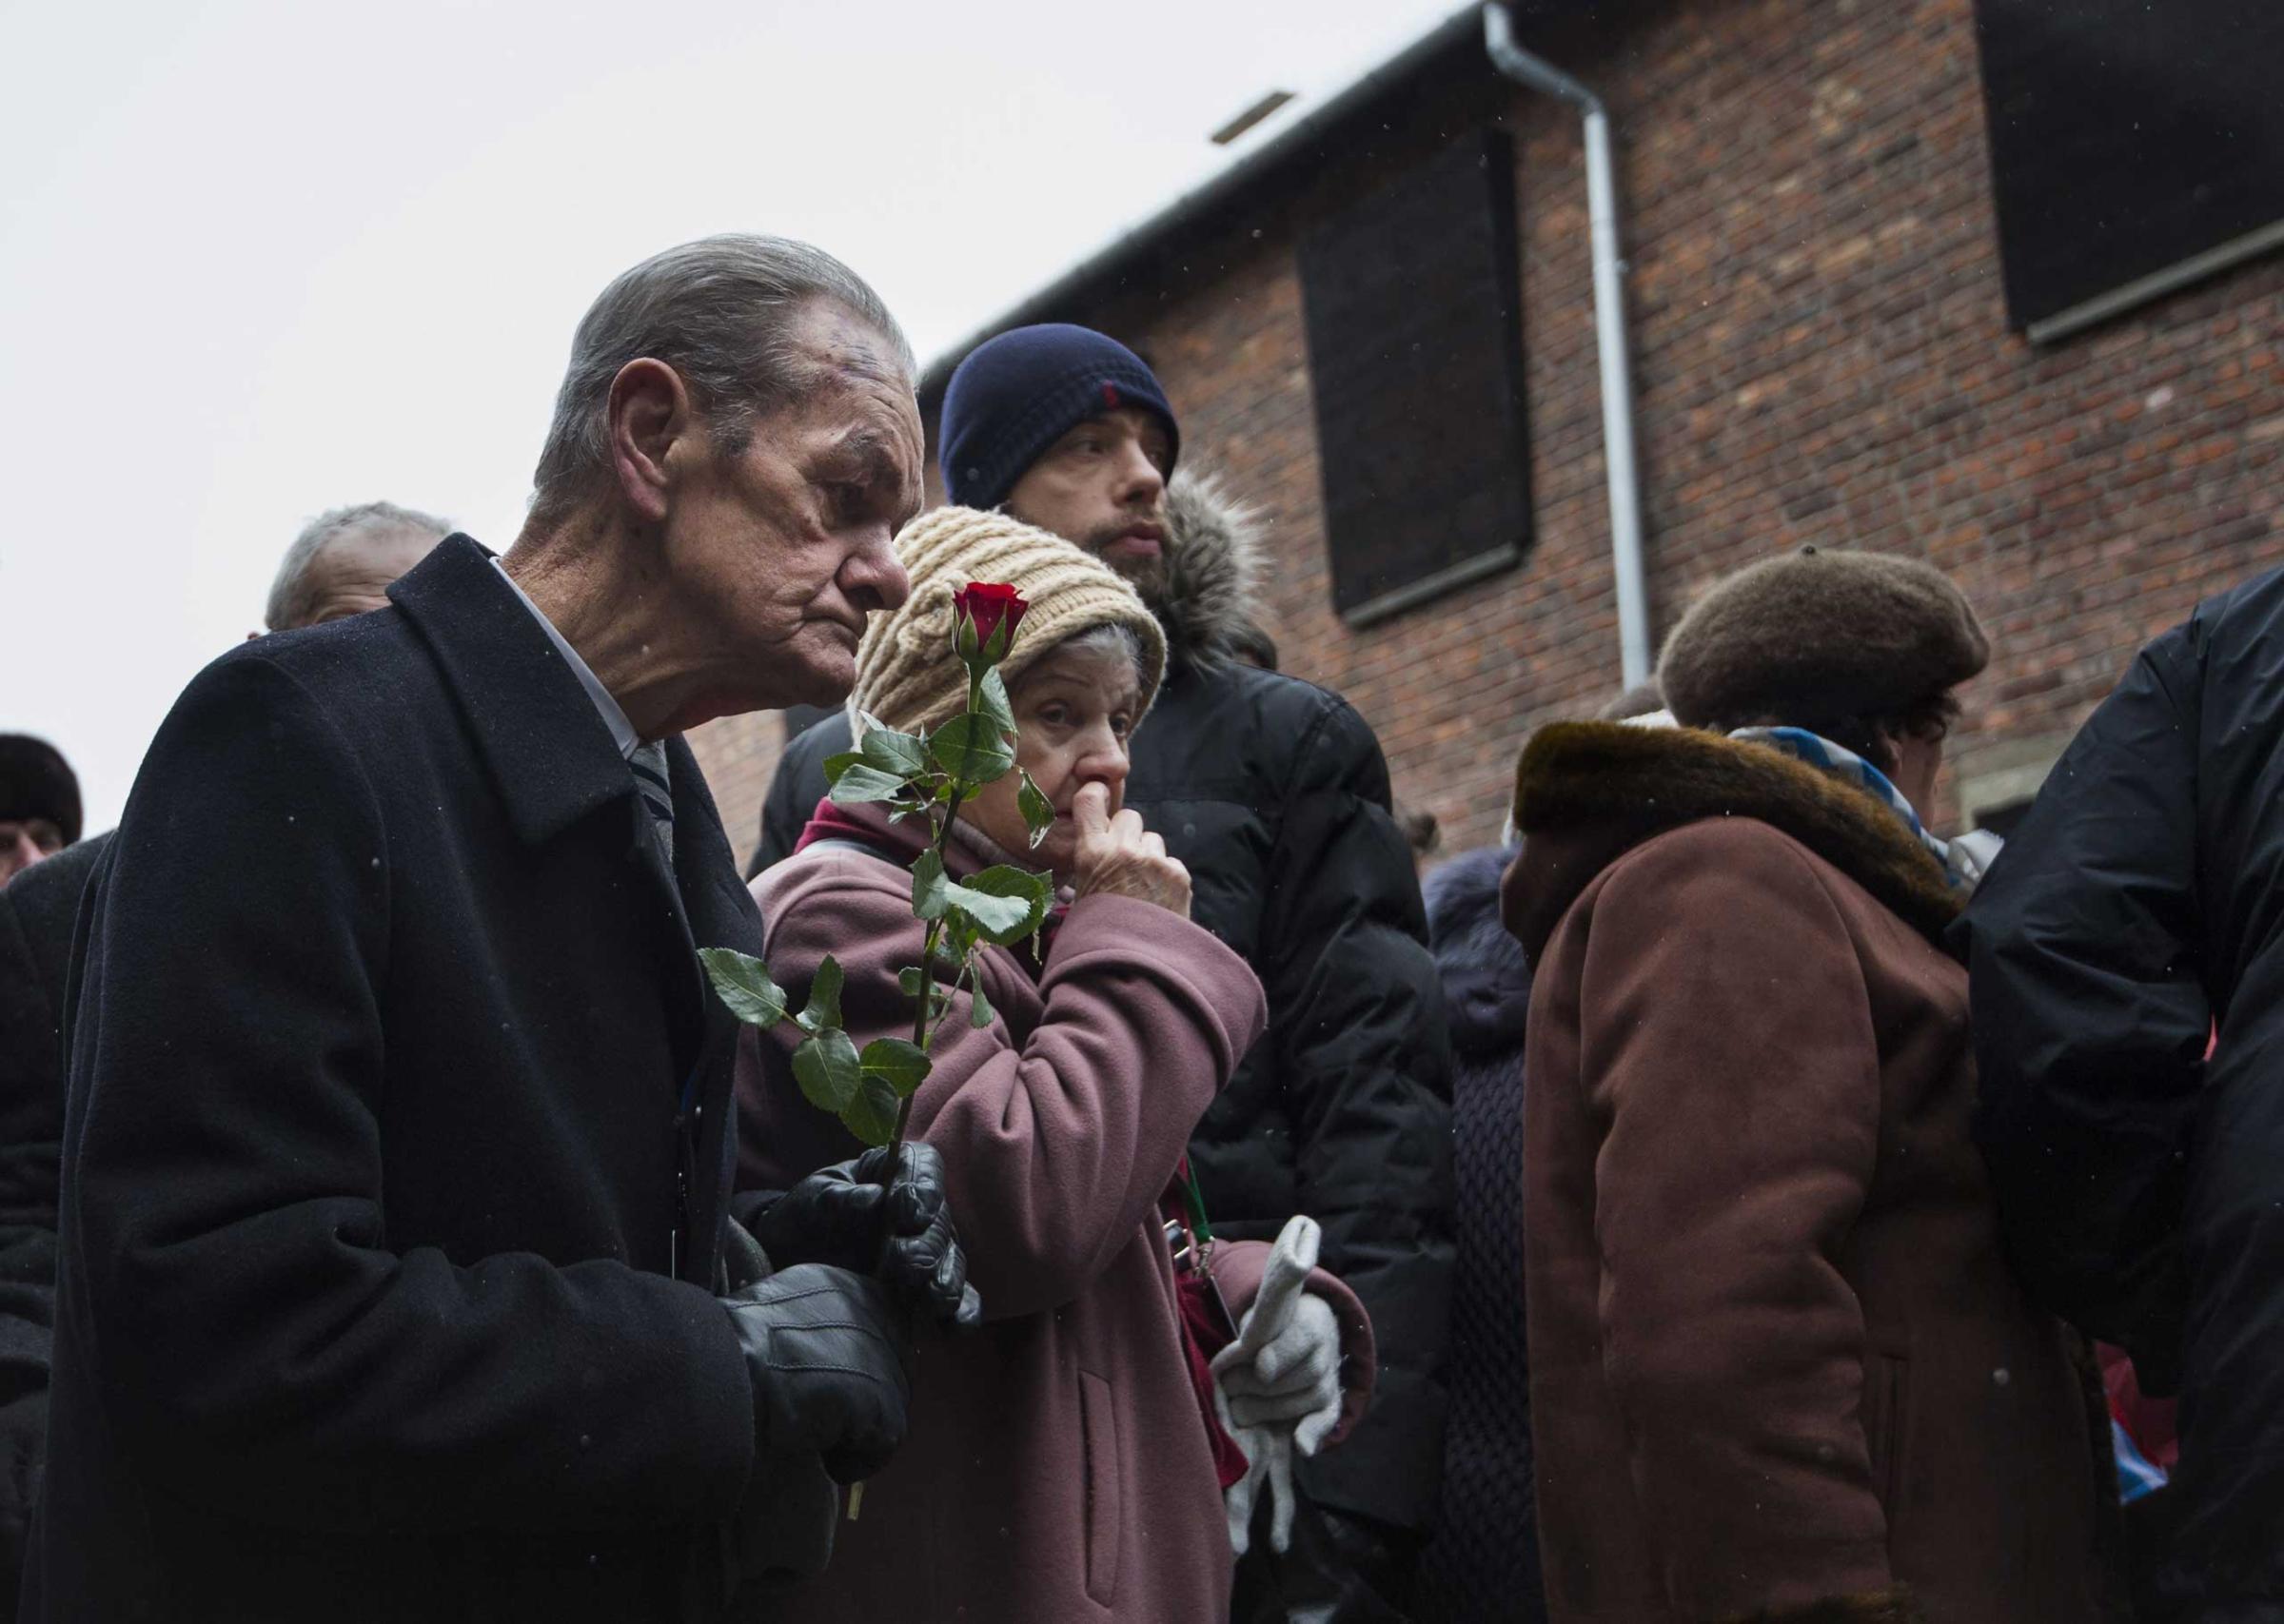 Holocaust survivors pay tribute to fallen comrades at the "death wall" execution spot in the former Auschwitz concentration camp in Oswiecim, on the 70th anniversary of the liberation of the Nazi death camp on Jan. 27, 2015.